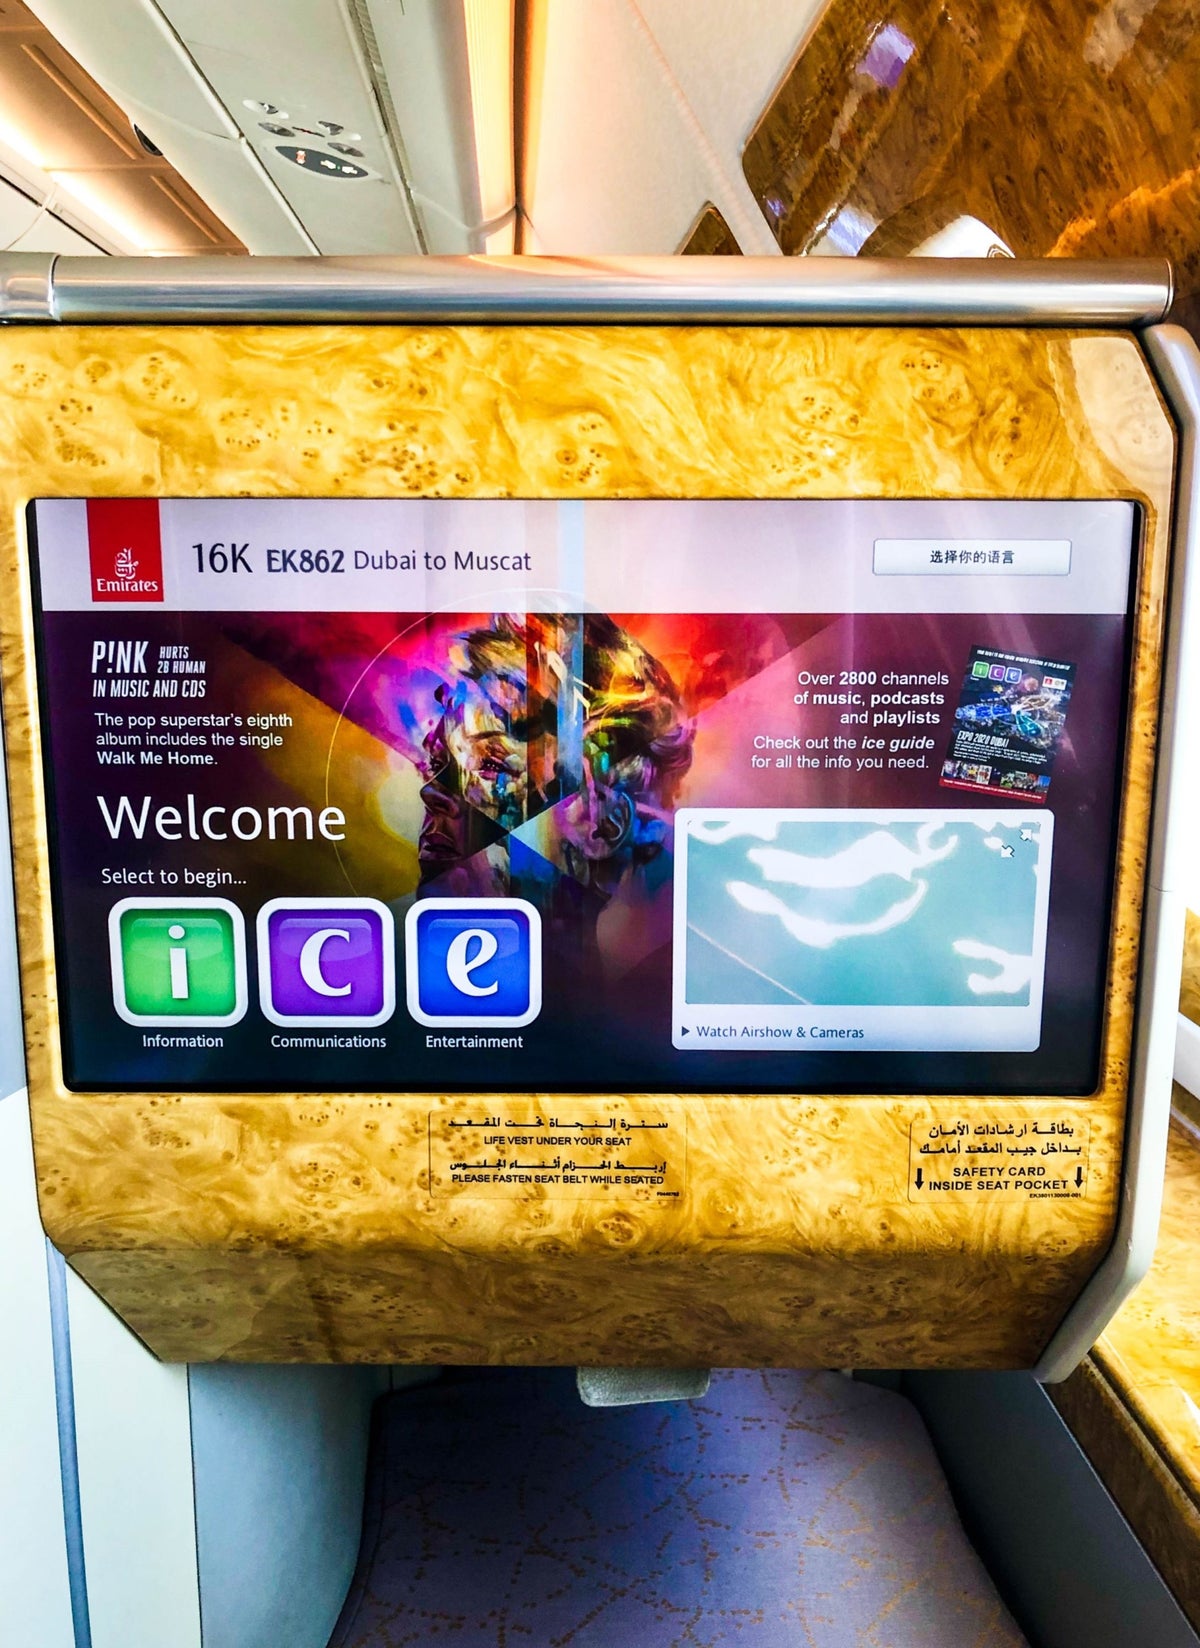 Emirates A380 Business Class TV monitor